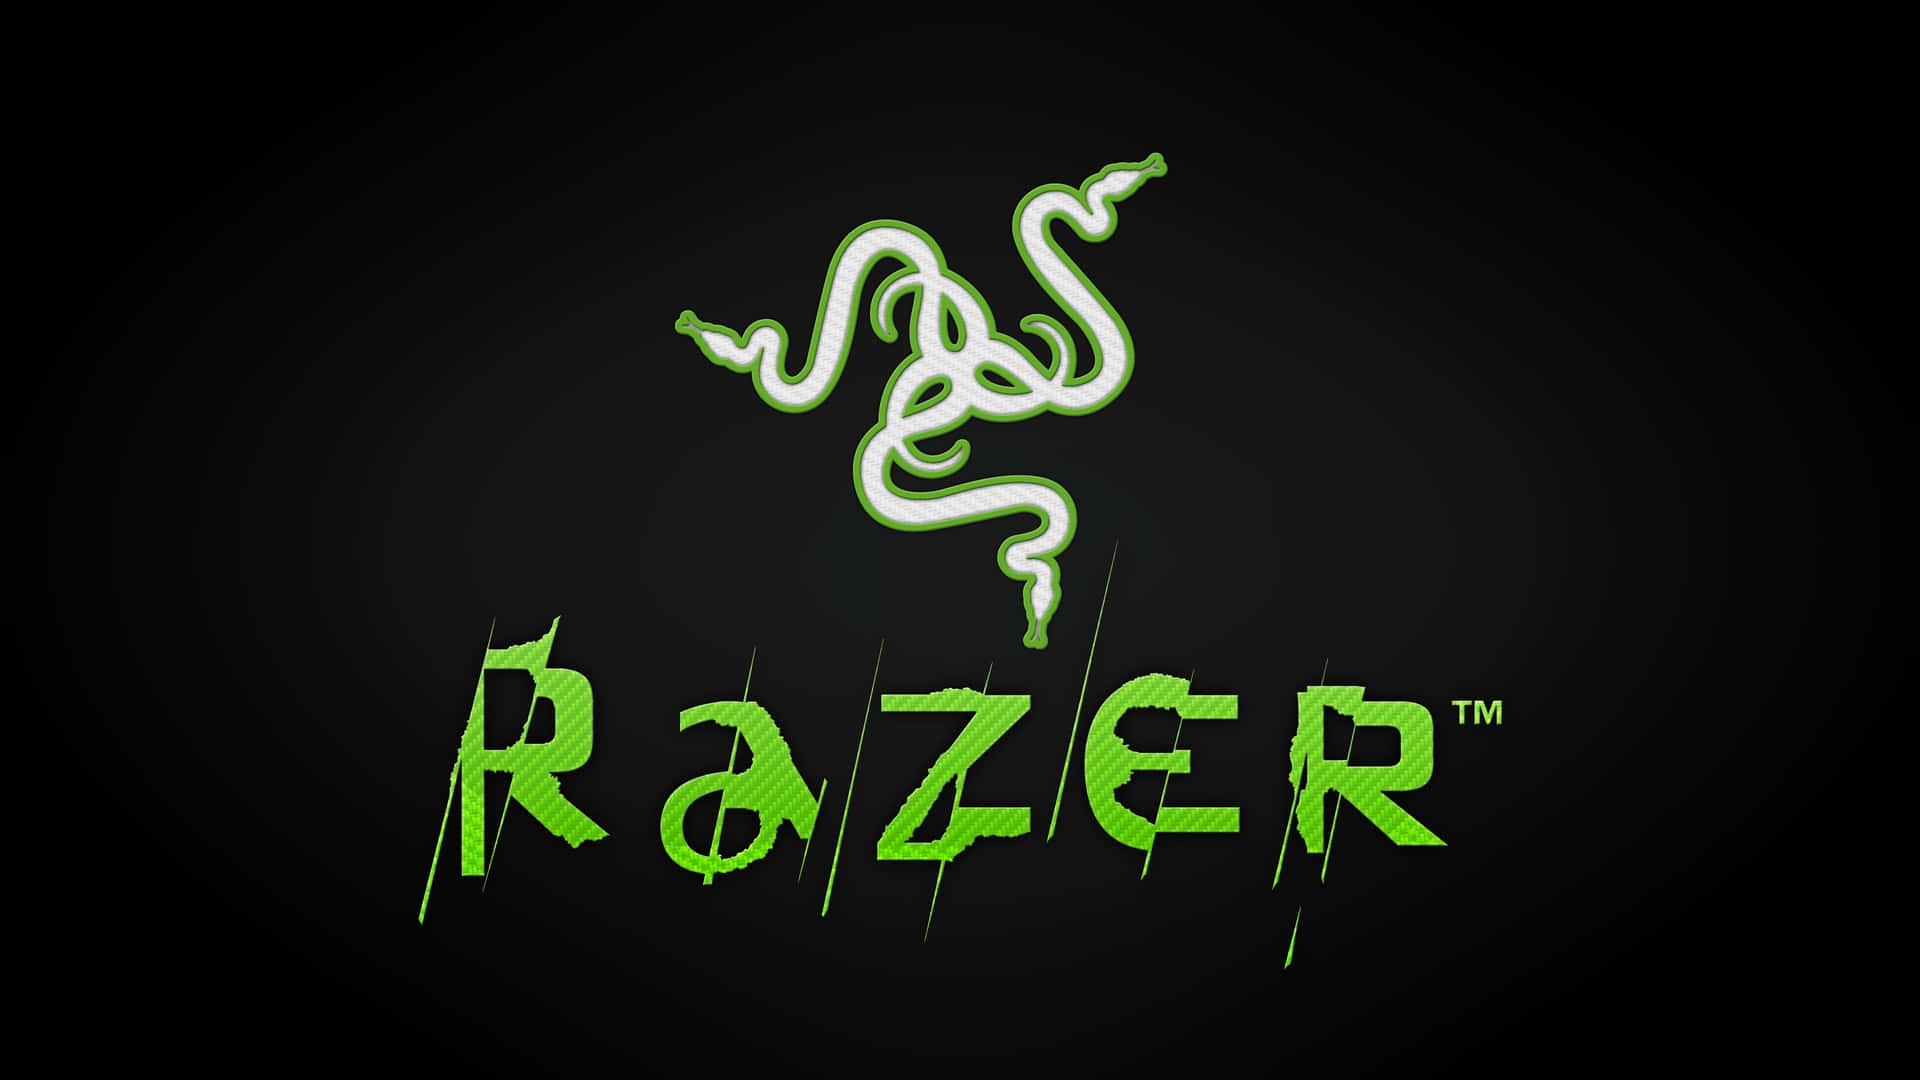 "Achieve peak performance on your gaming laptop with the Razer Blade Pro 17"